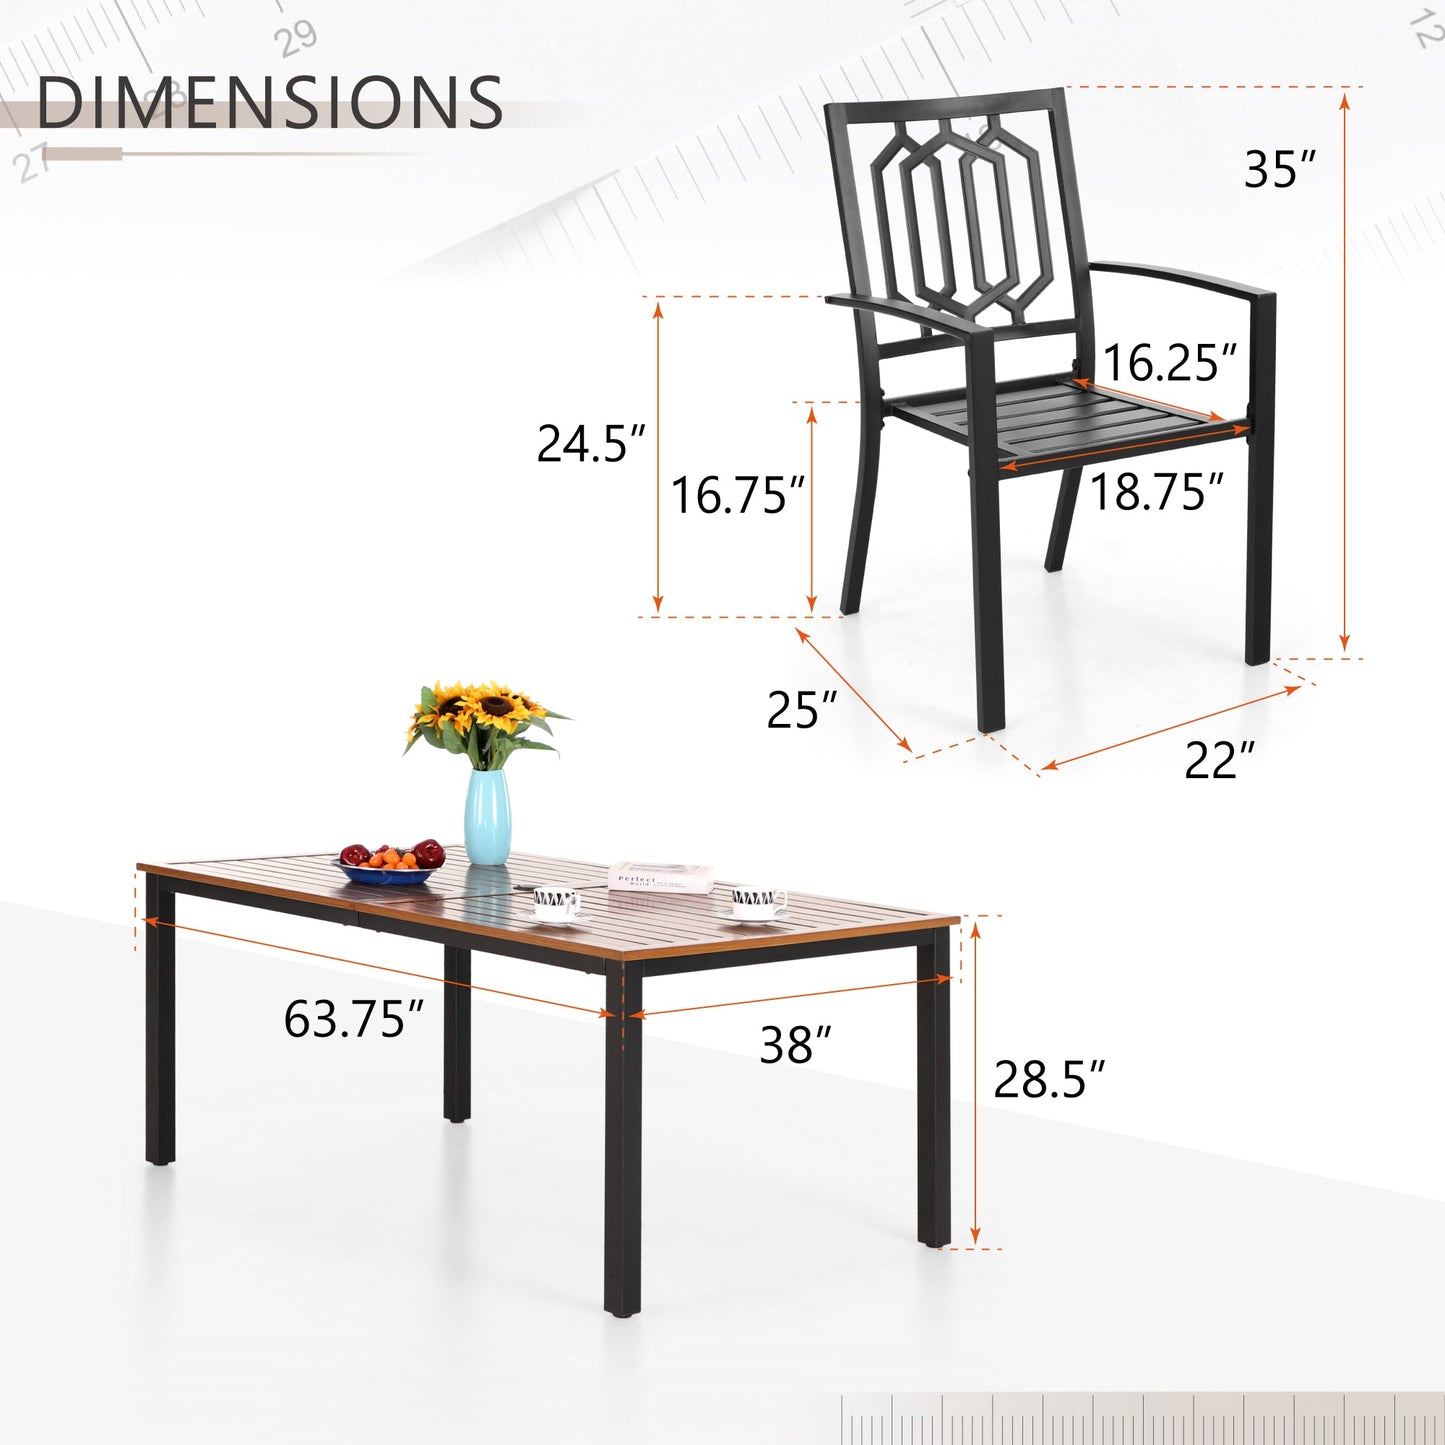 Sophia & William 7-Piece Outdoor Patio Dining Set Pattern Metal Chairs and Teak-grain Table Set